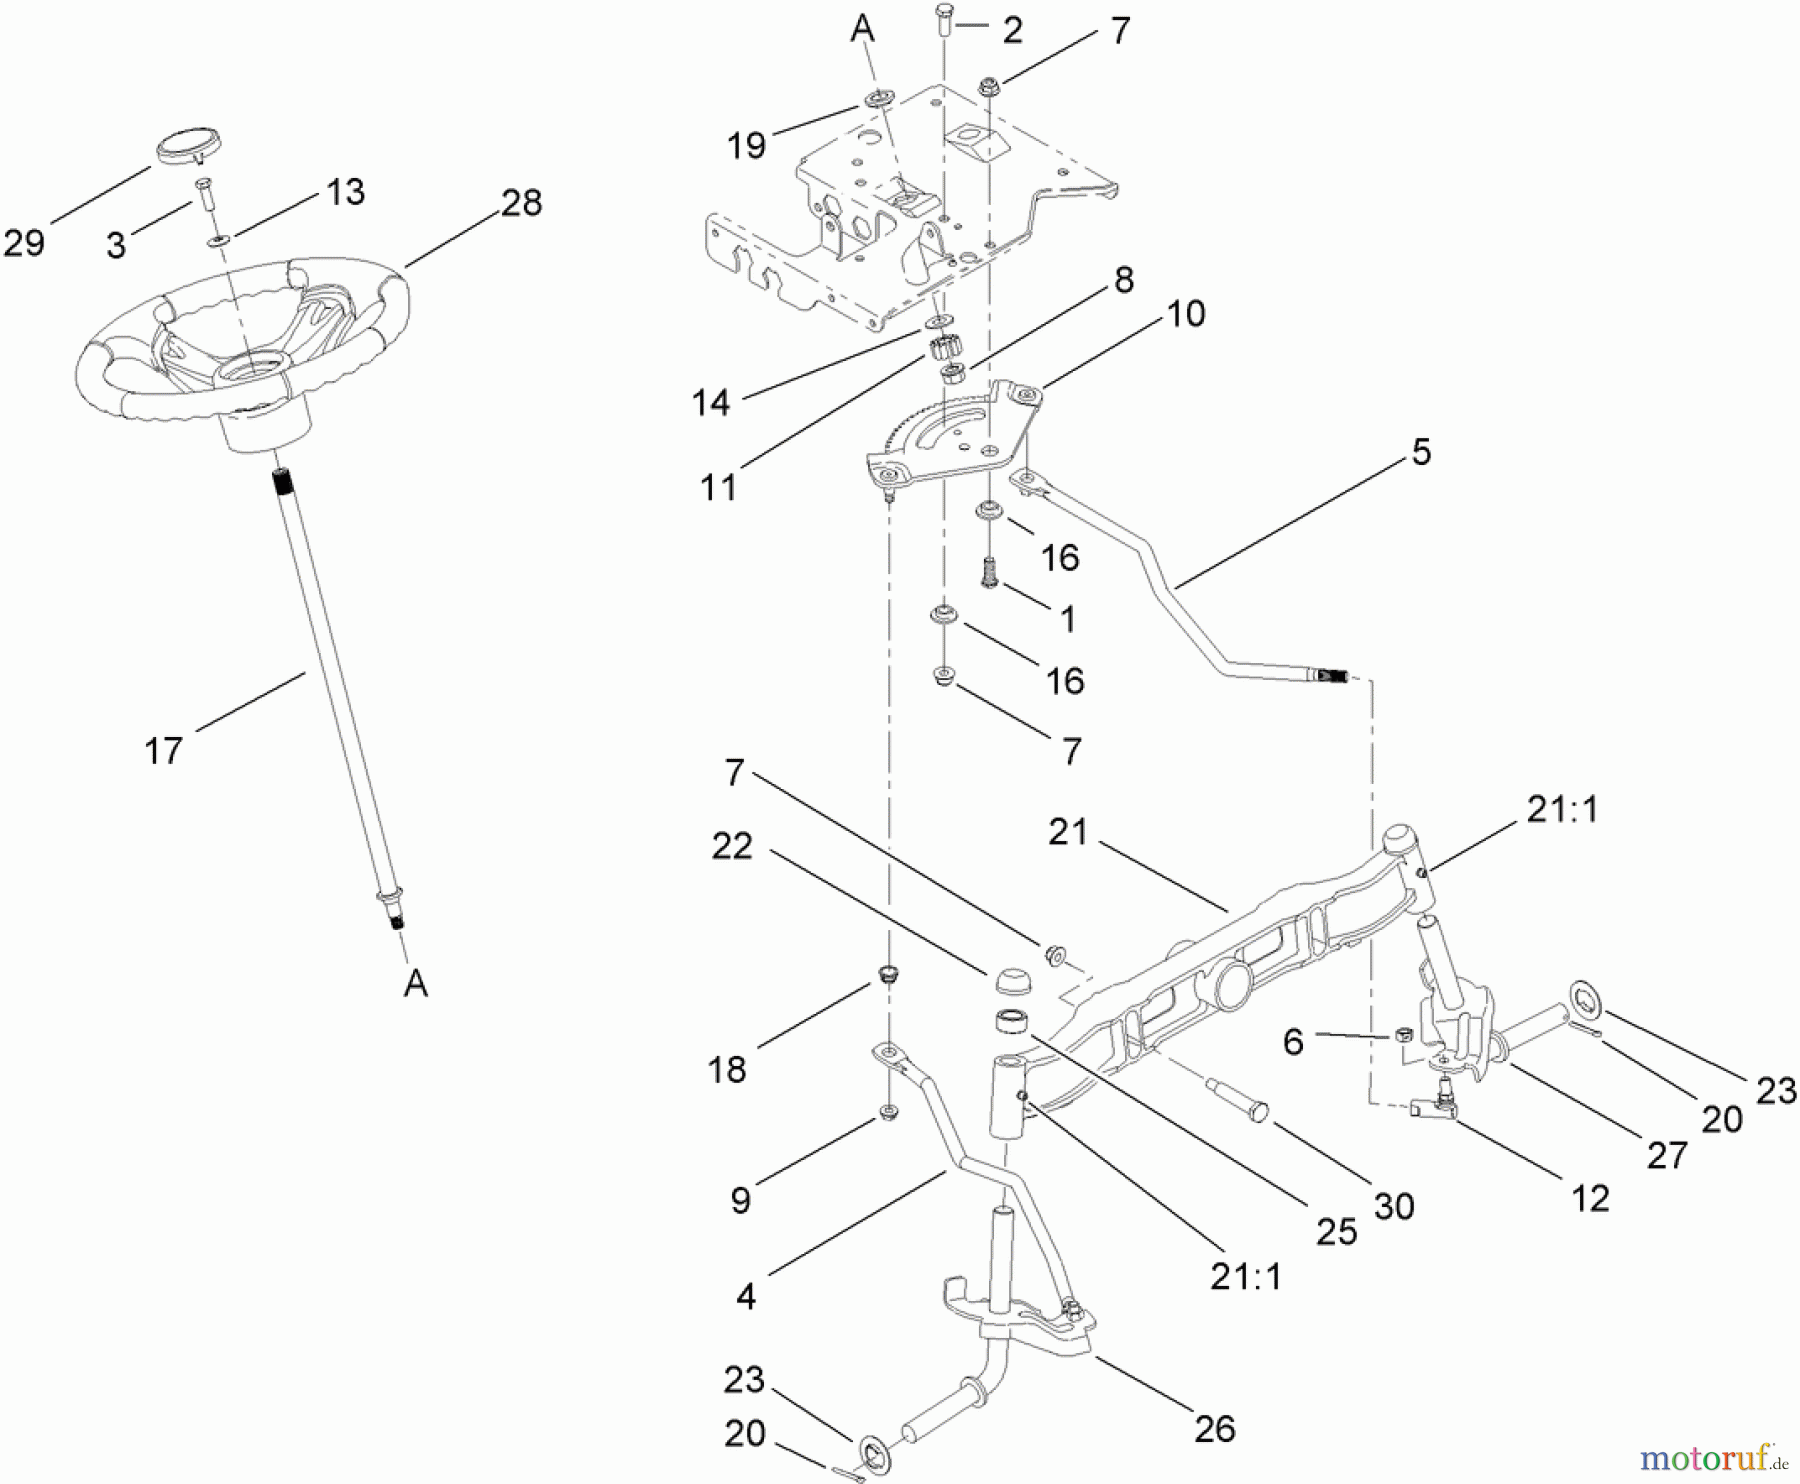  Toro Neu Mowers, Lawn & Garden Tractor Seite 1 13AL60RG048 (LX426) - Toro LX426 Lawn Tractor, 2008 (SN 1L107H10100-) STEERING SHAFT AND FRONT AXLE ASSEMBLY